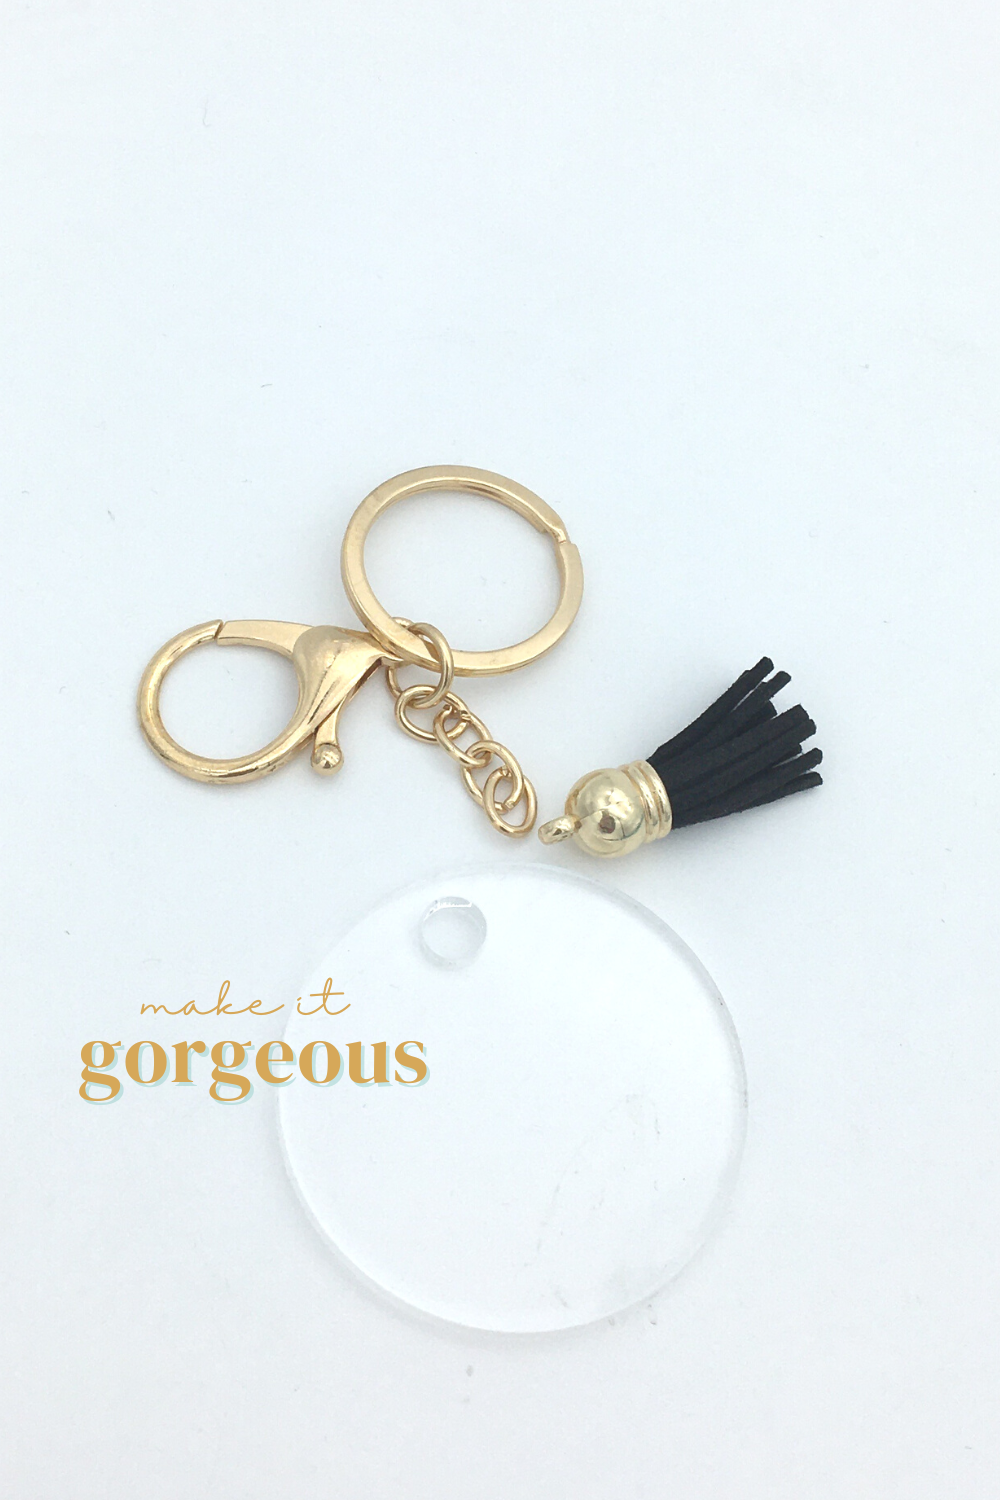 Round disc Acrylic Keyring, tassel & Lobster claw keychain sets Gold – Make  It Gorgeous